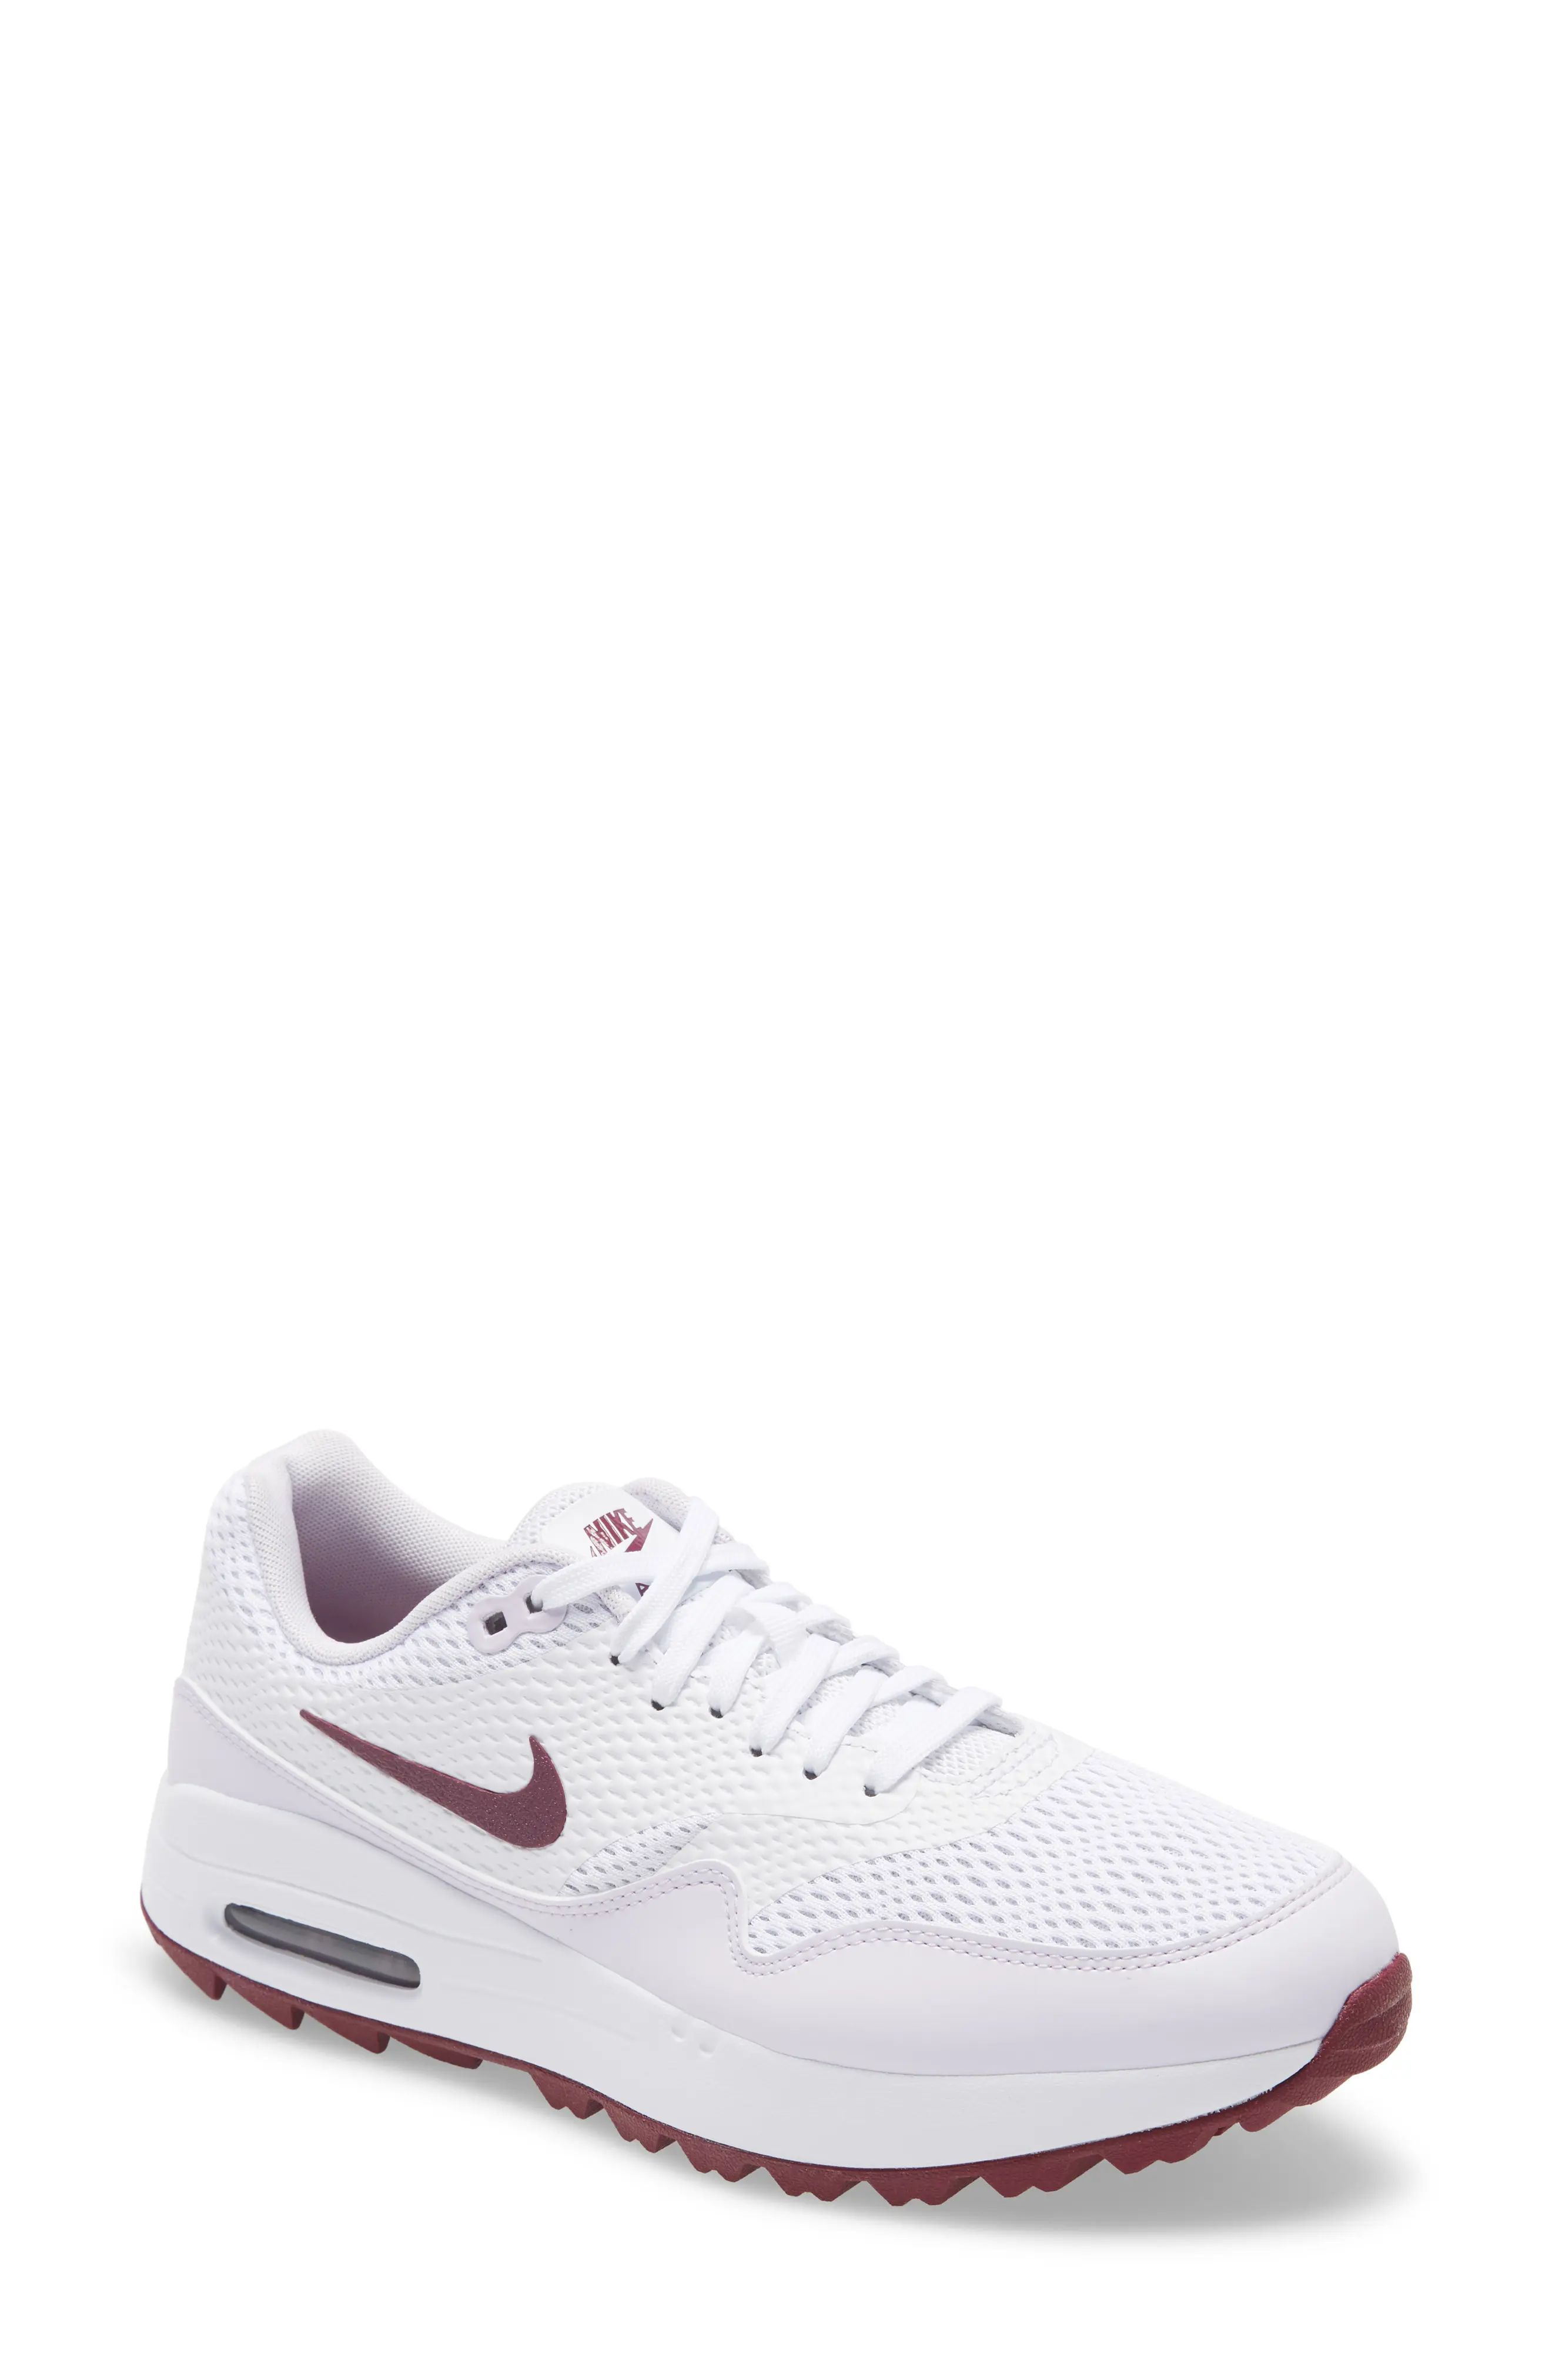 Women's Nike Air Max 1 G Golf Shoe, Size 5 M - White | Nordstrom